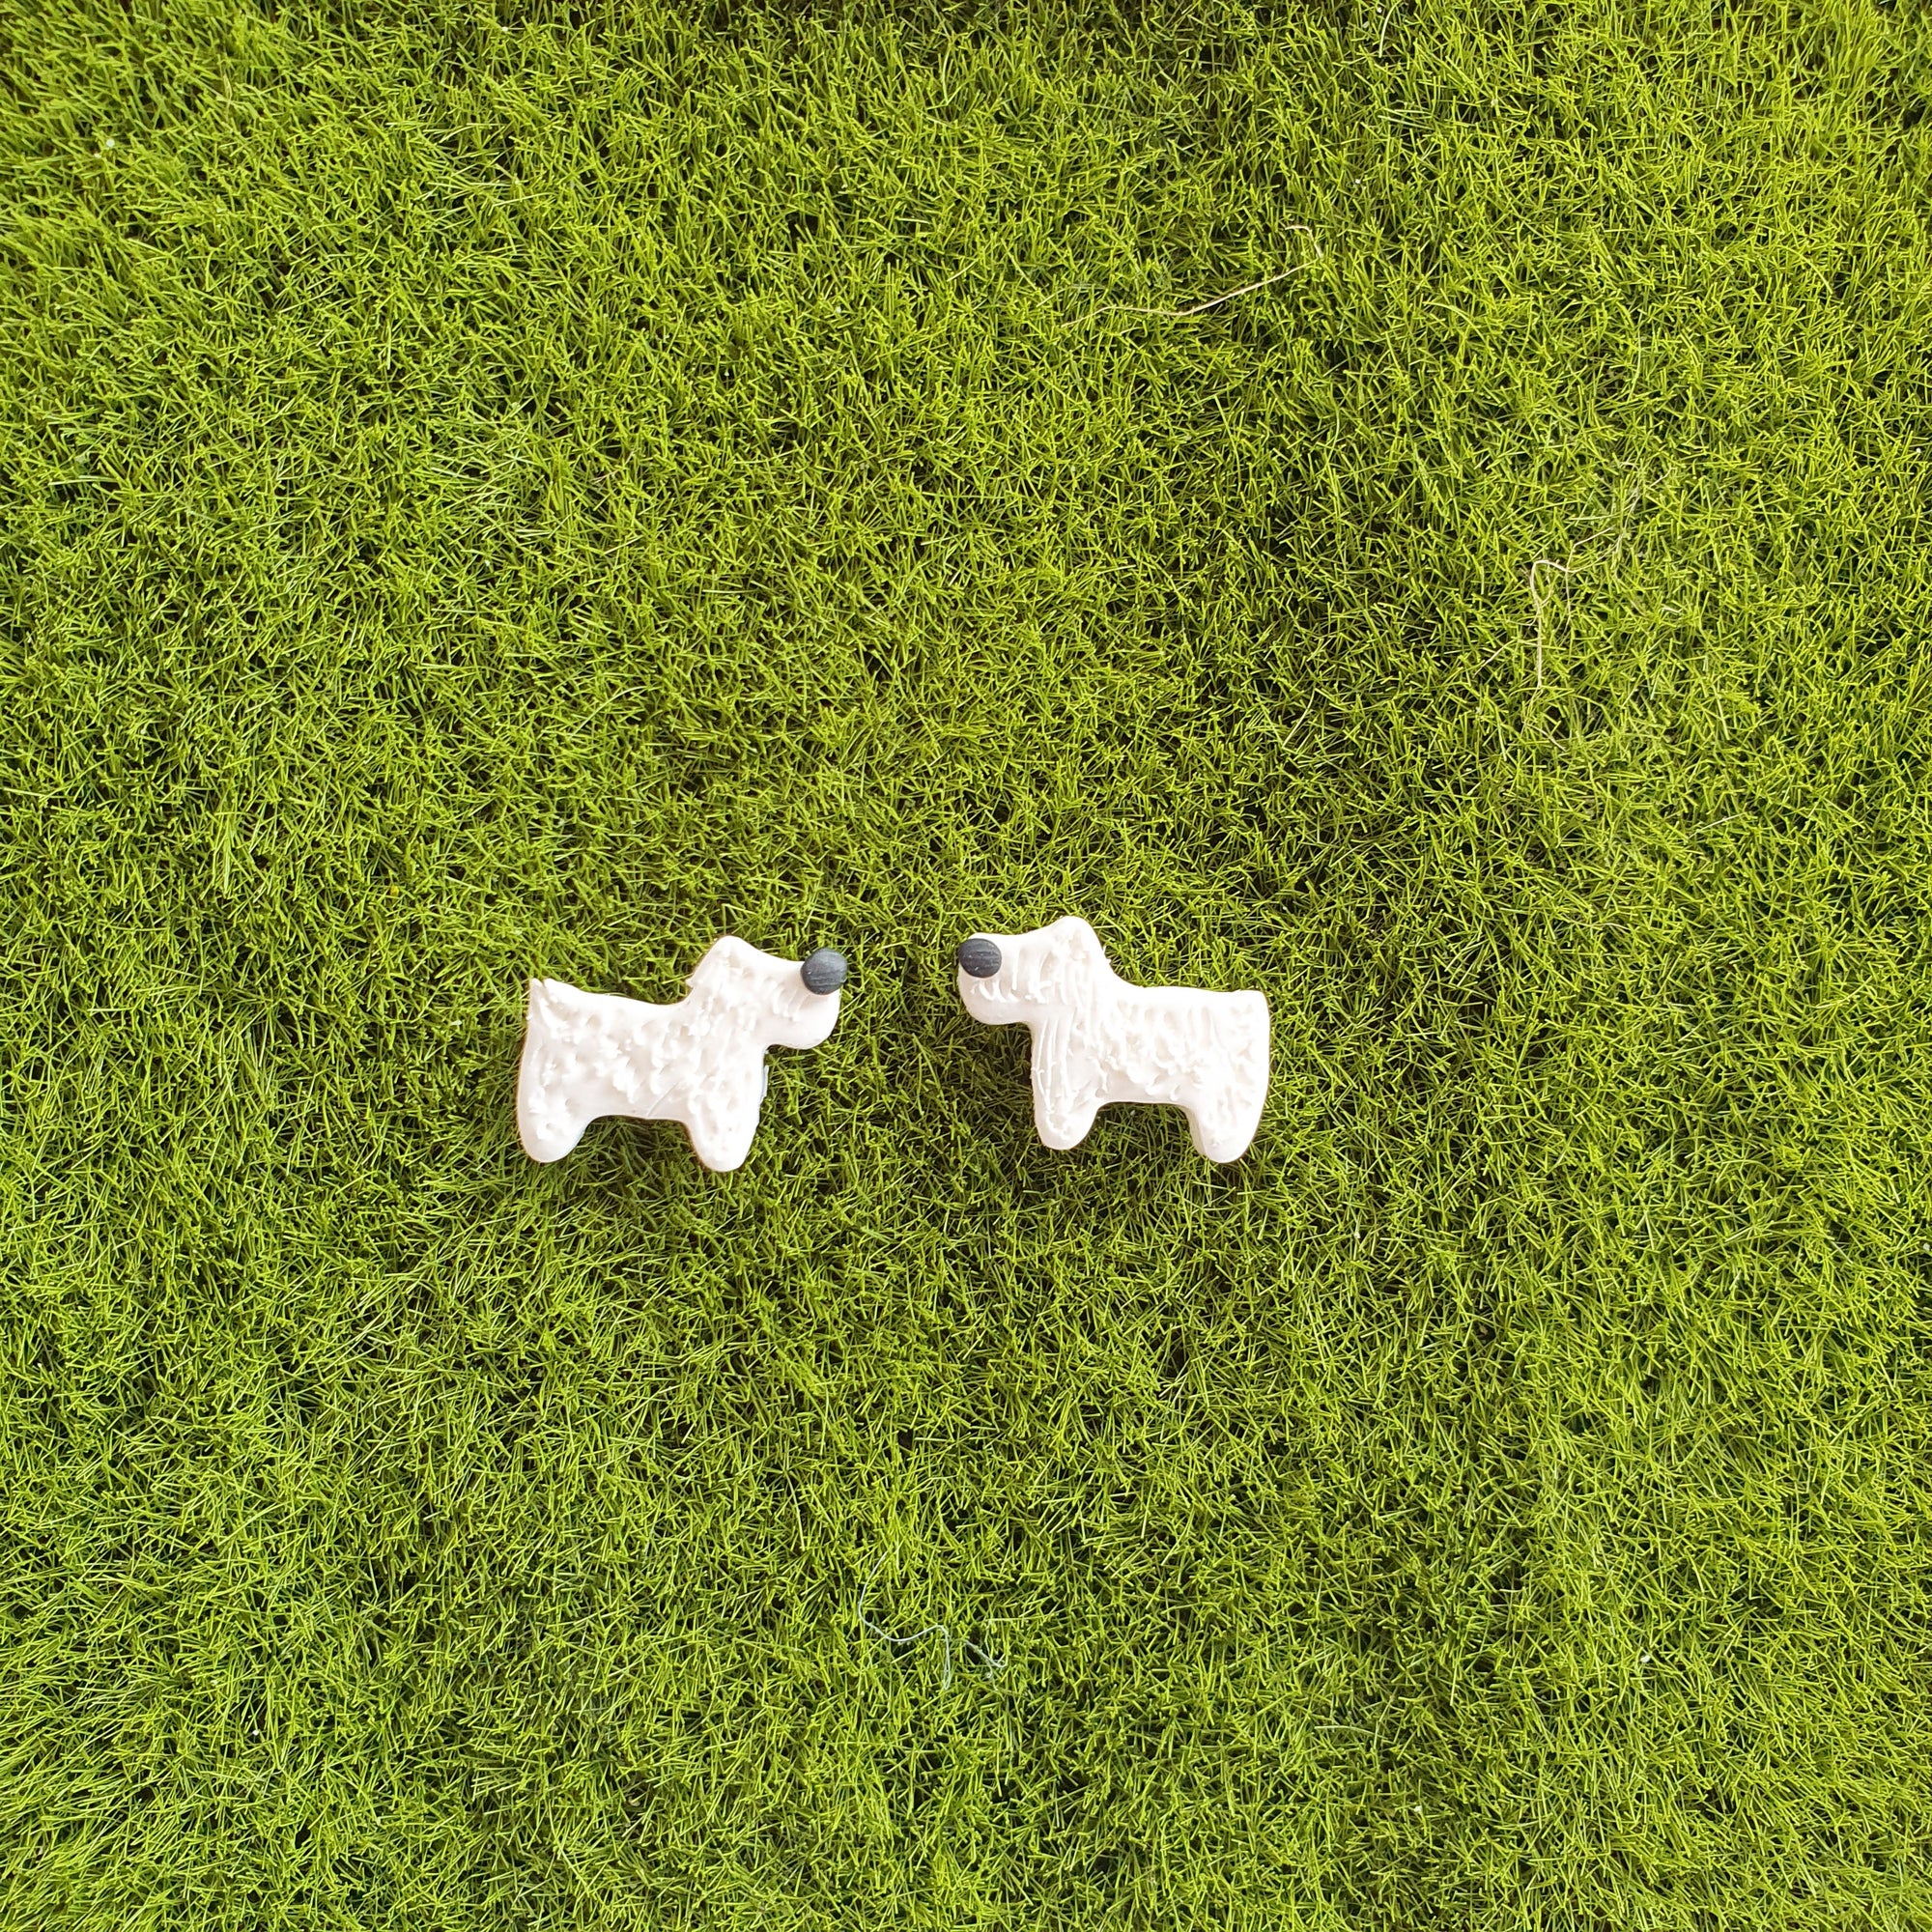 Terrier Dog Cookie Cutter Tiny Mini